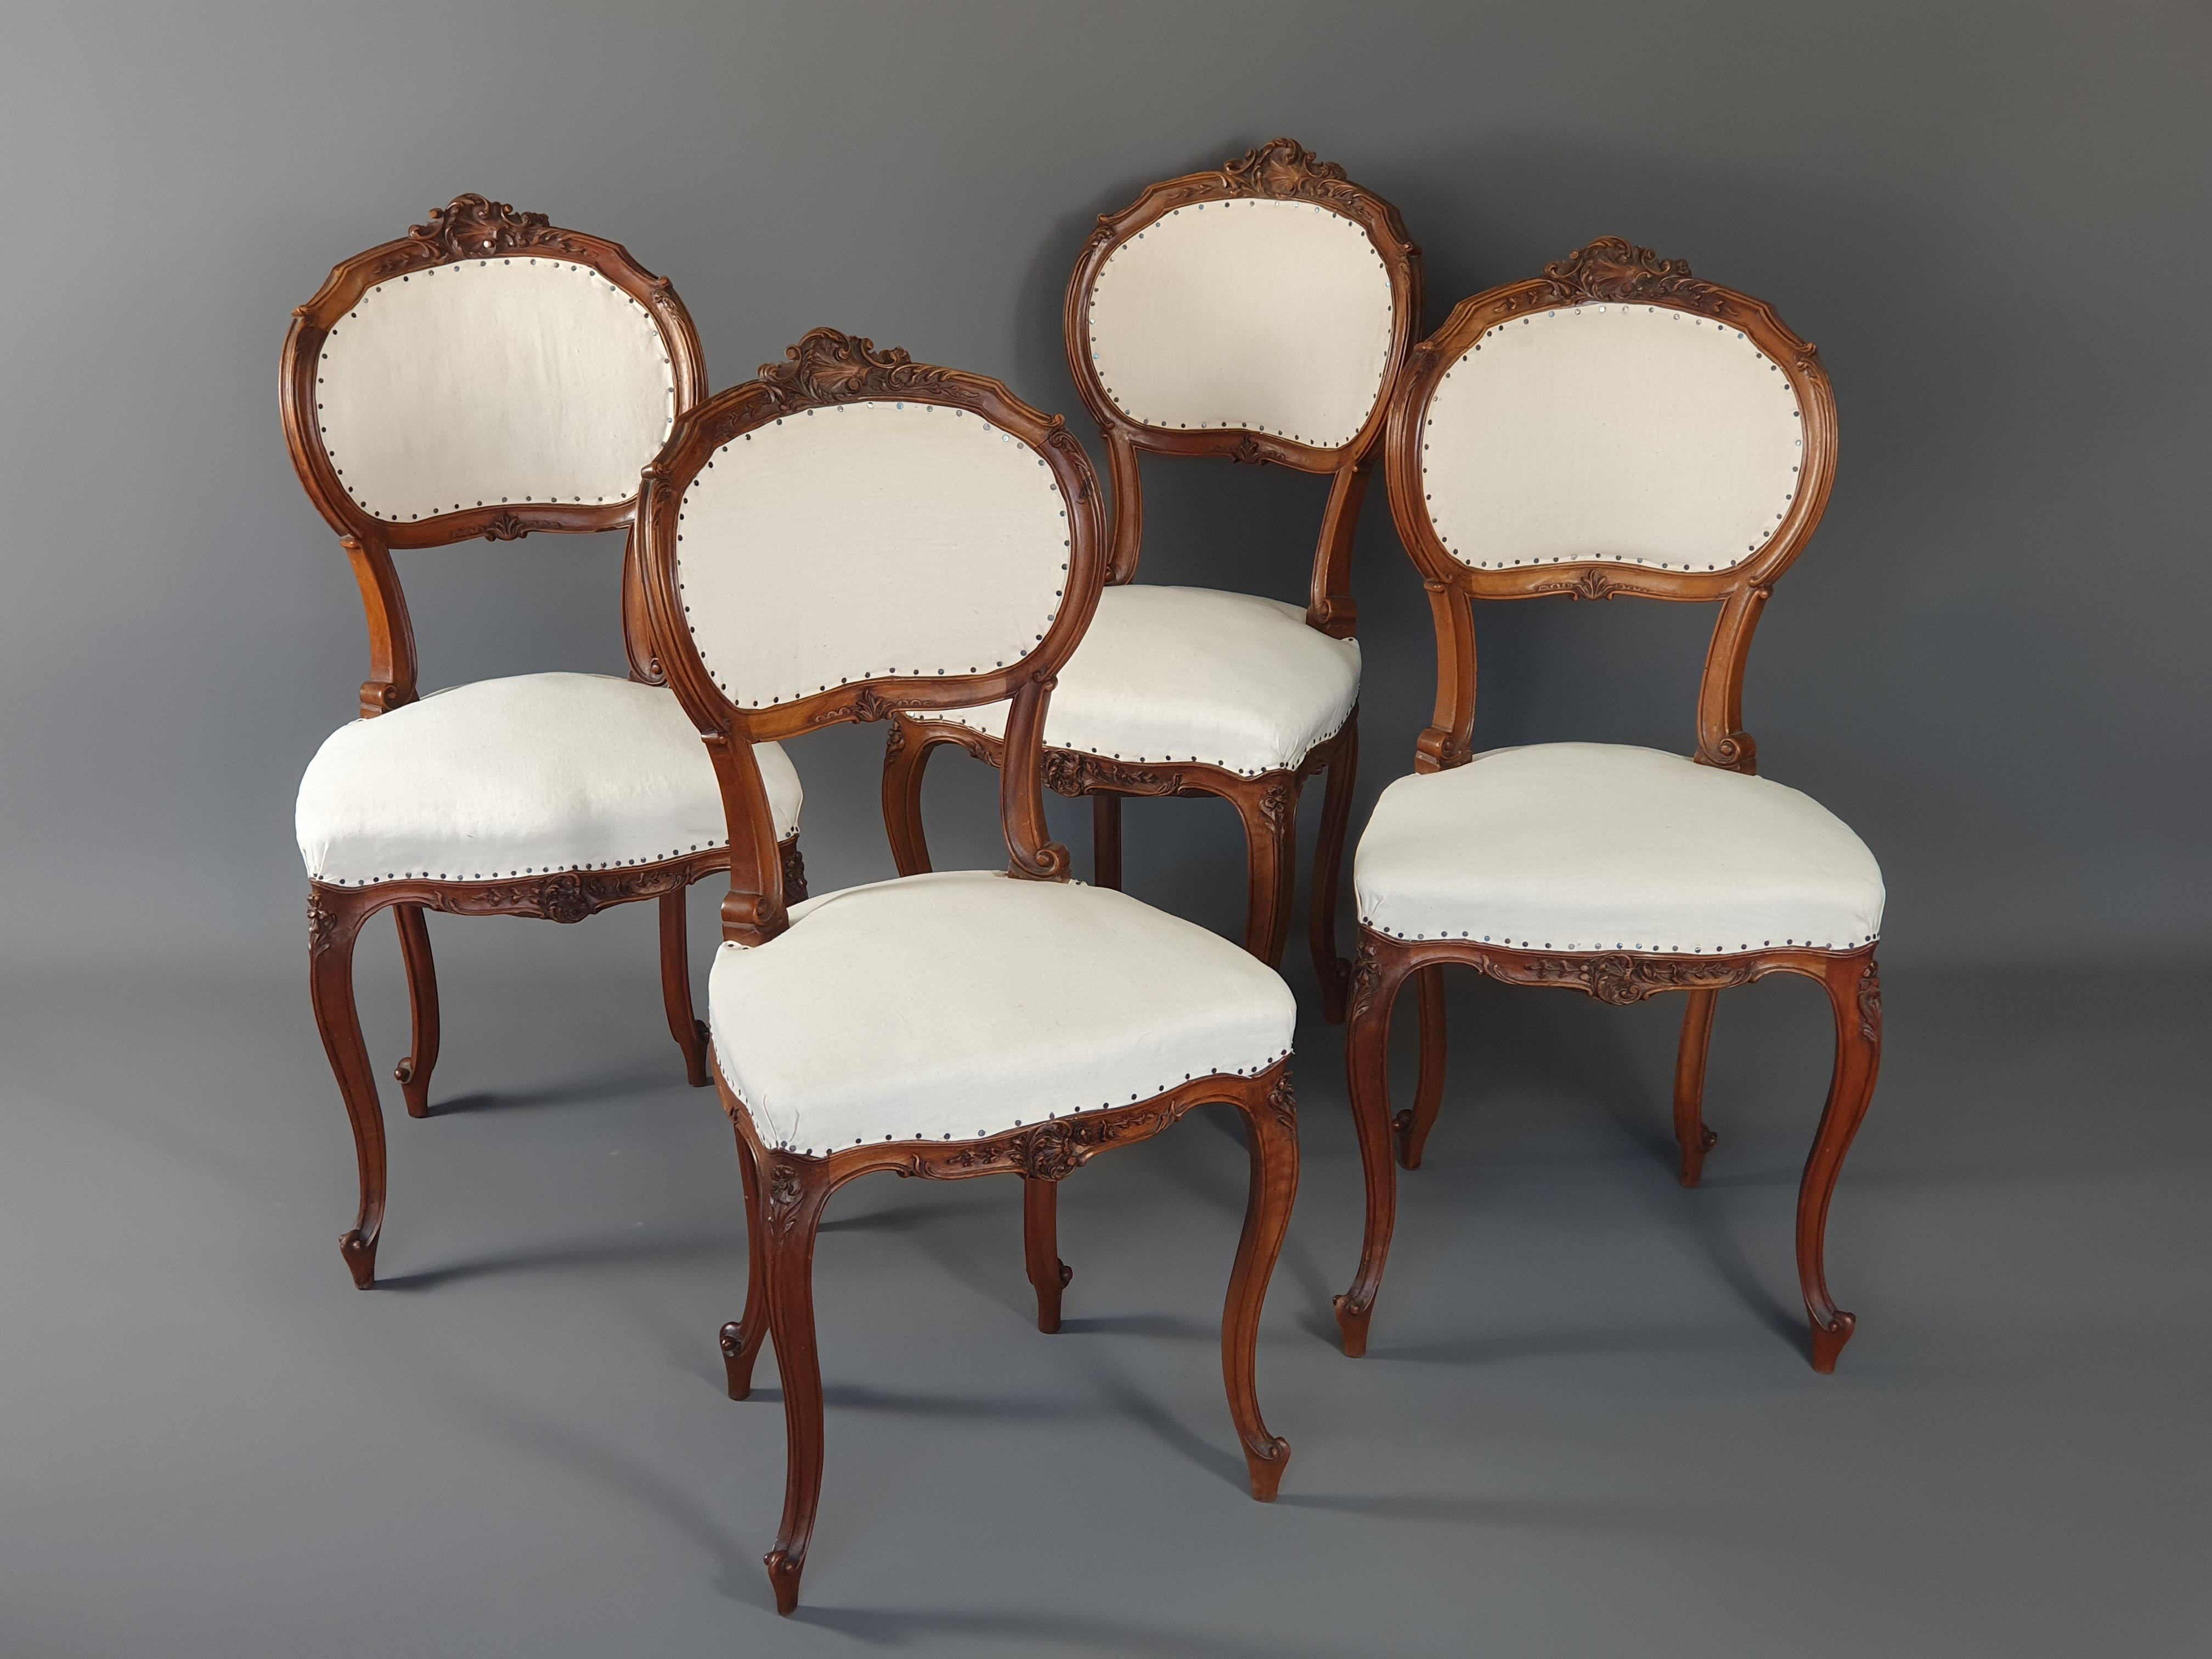 Walnut Suite of Four Louis XV Rocaille Chairs